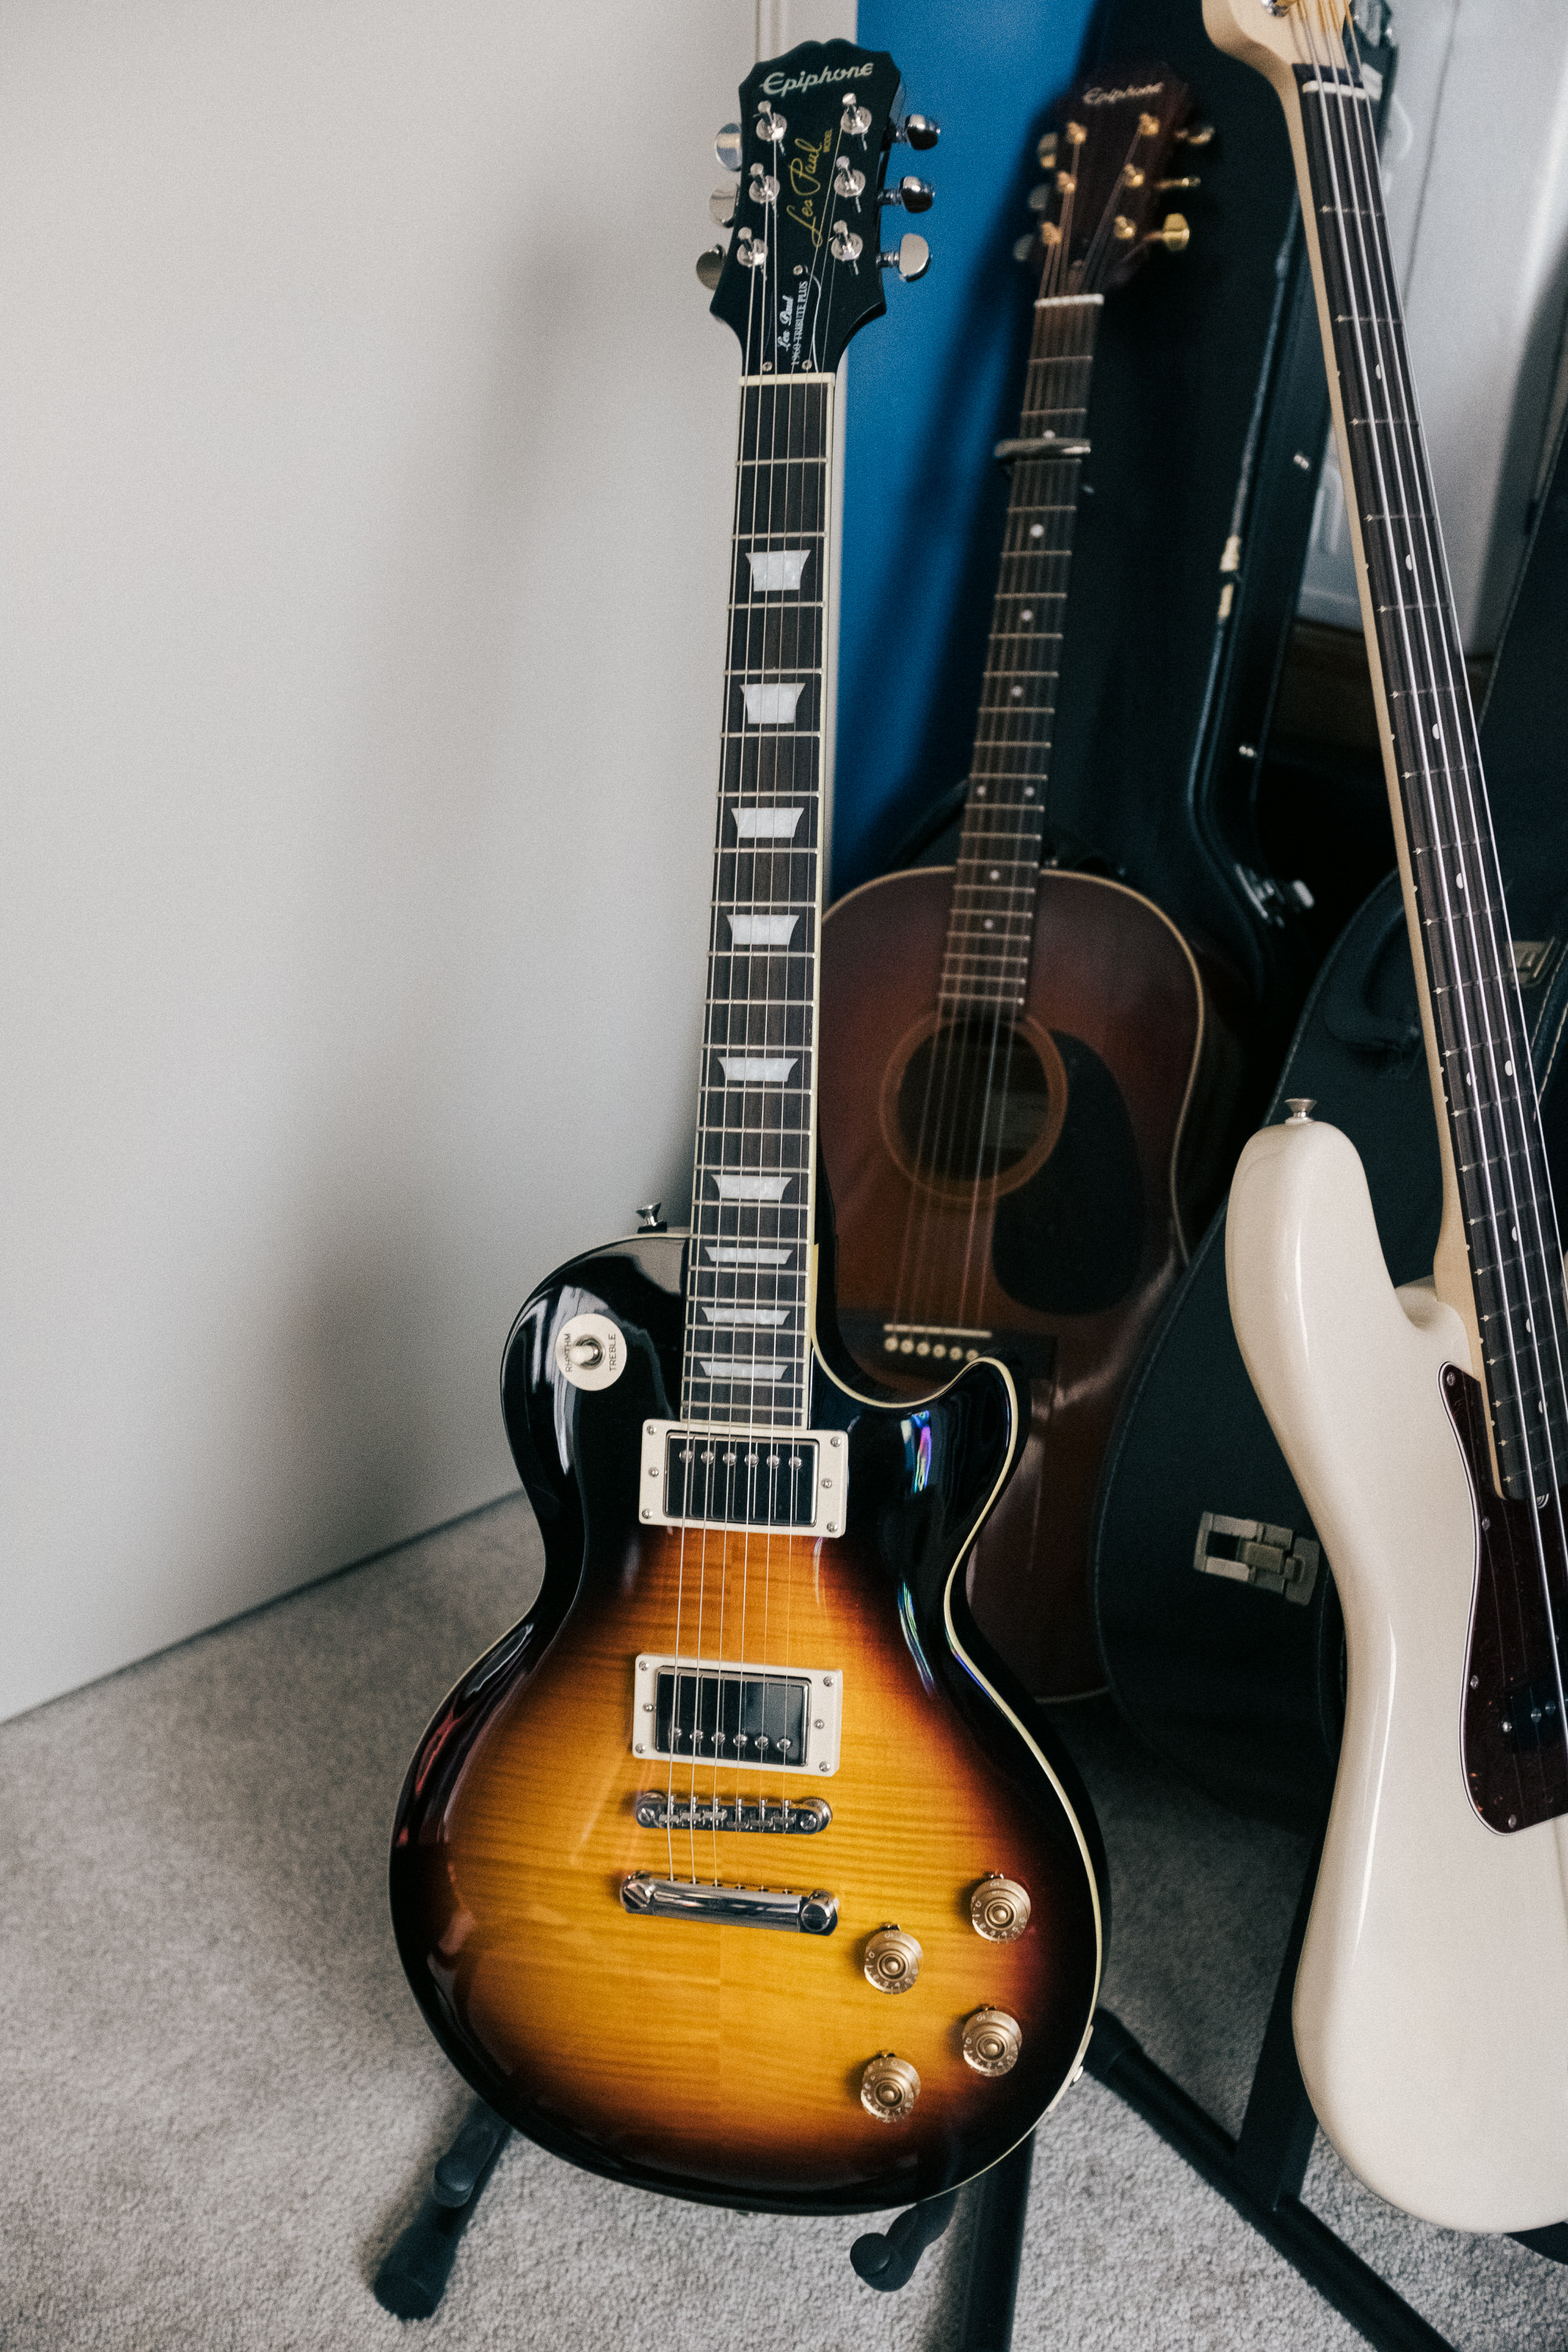 An image of the Epiphone Les Paul.